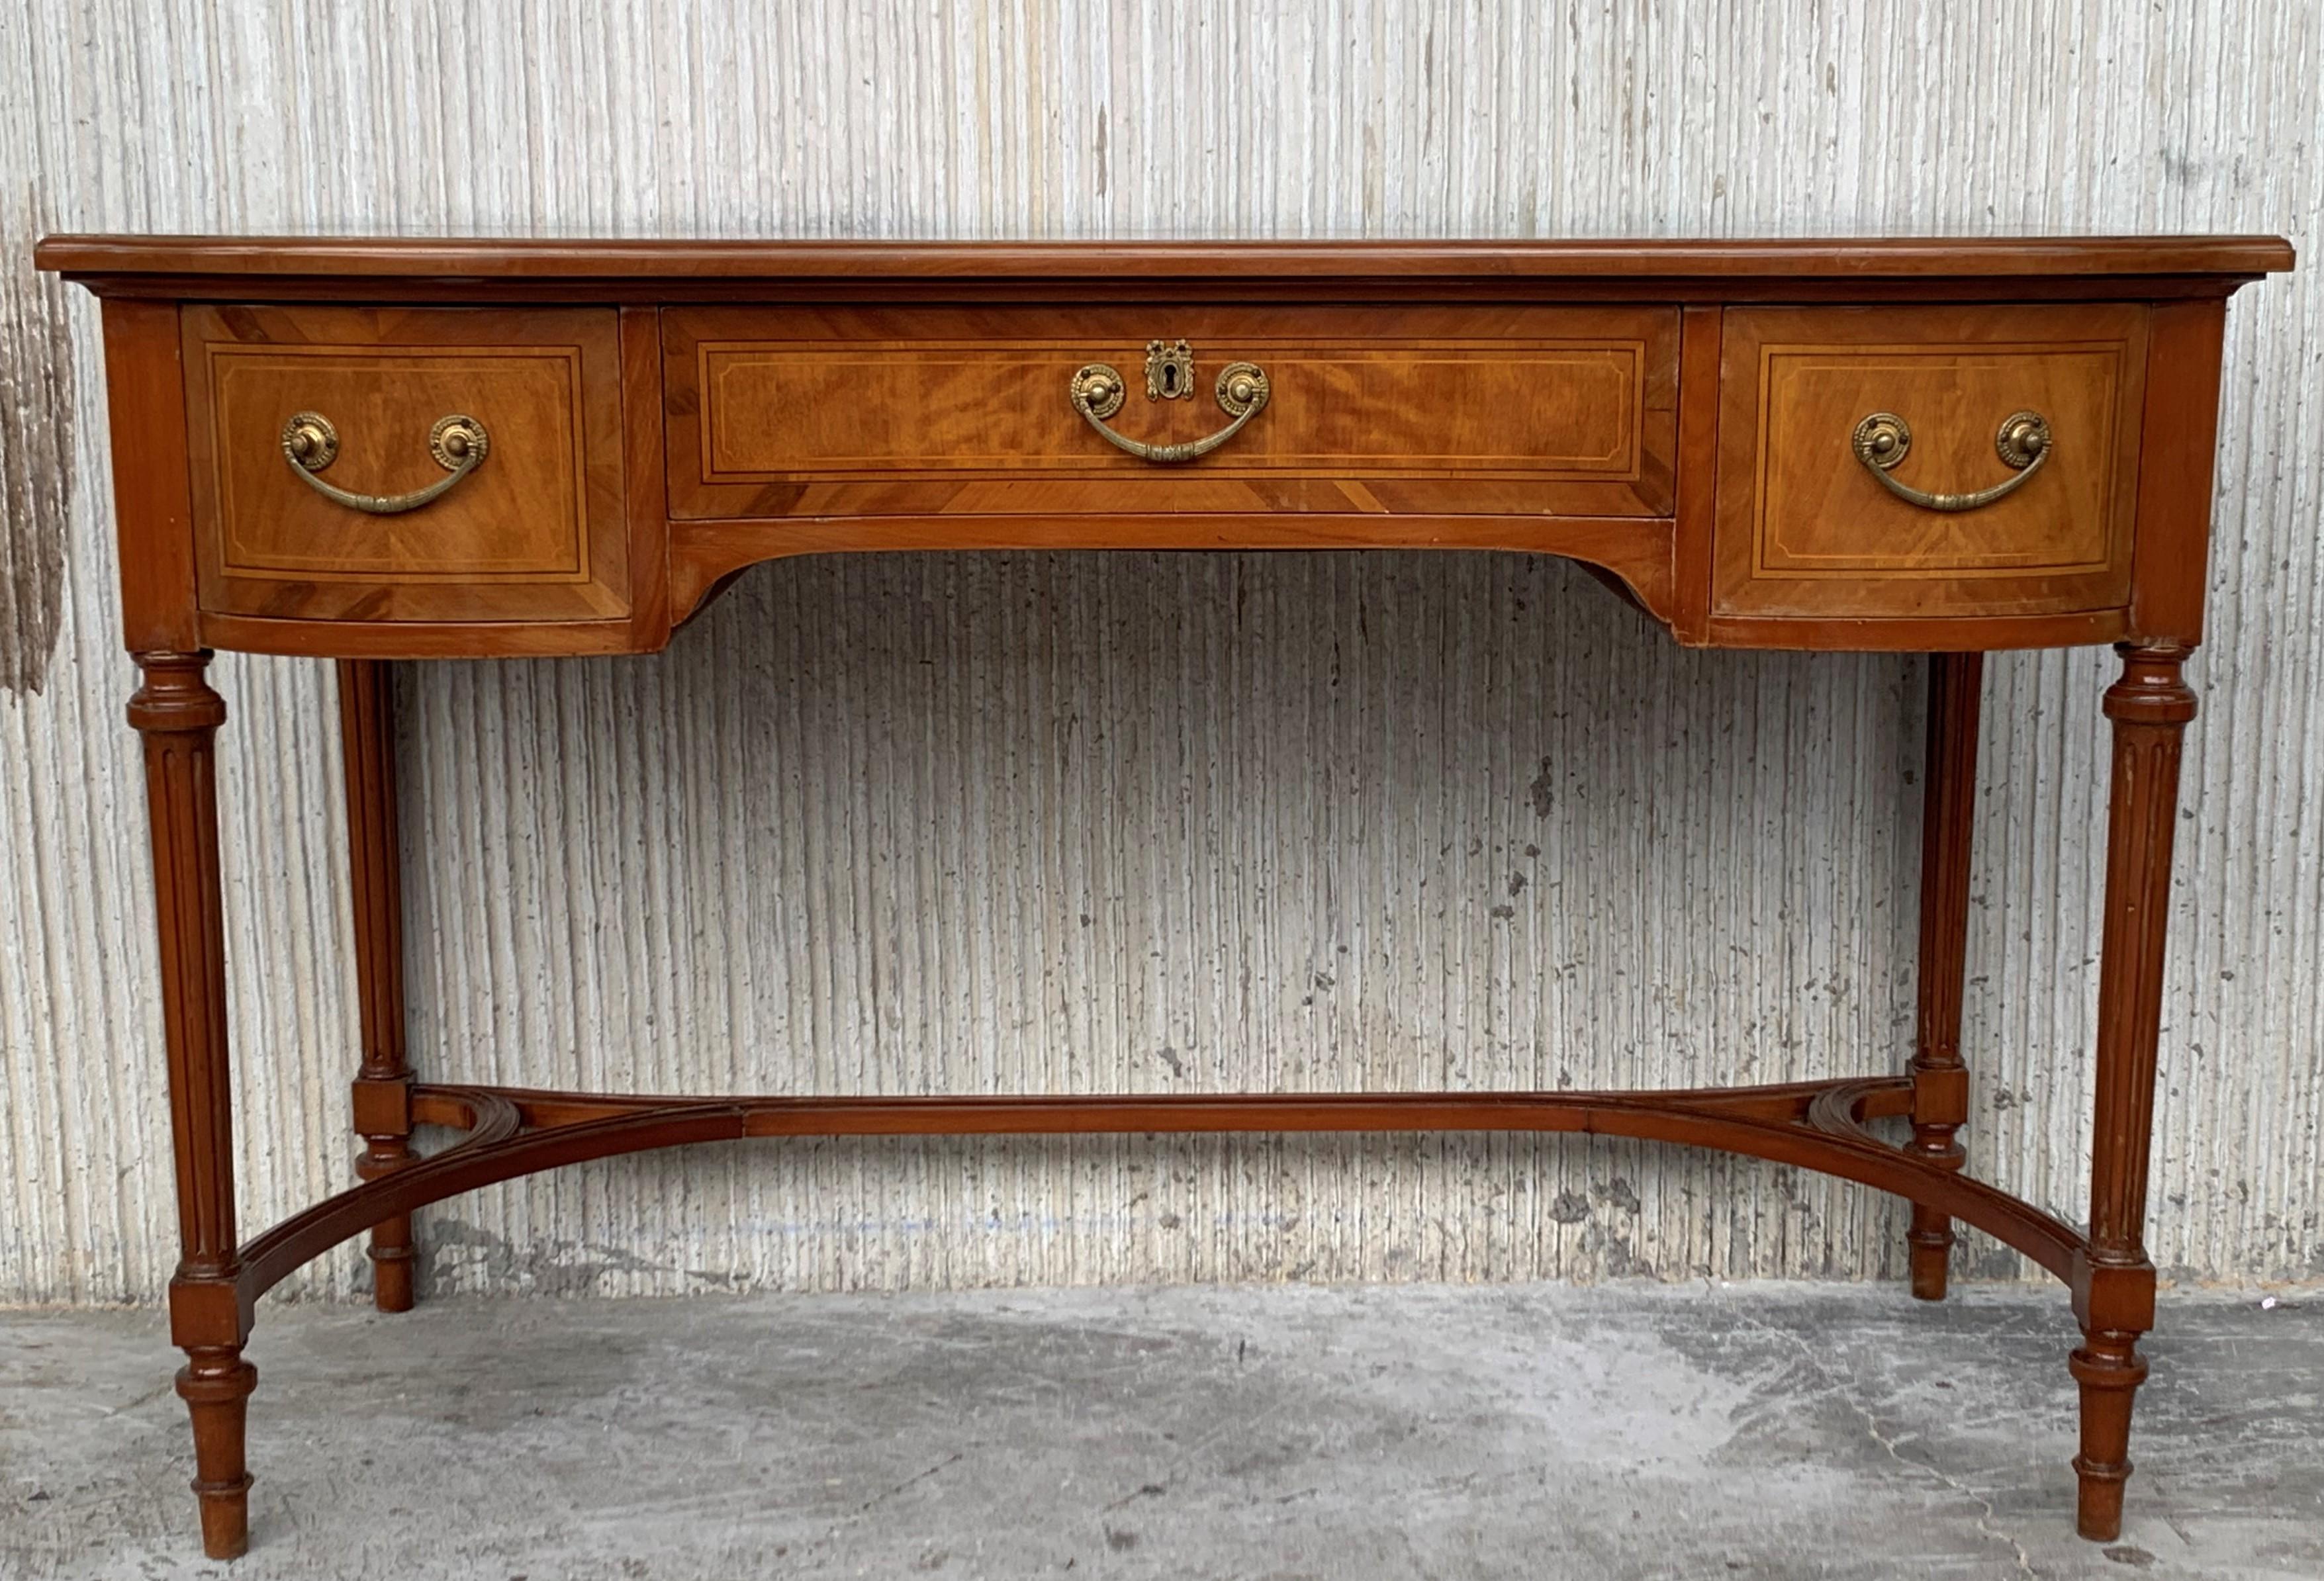 This elegant fruitwood desk was created in France, circa 1920. Made of wild cherry timber, the large writing table sits on four cabriole legs over a decorative scalloped apron. The front has a wide opening with plenty of knee space and the back is